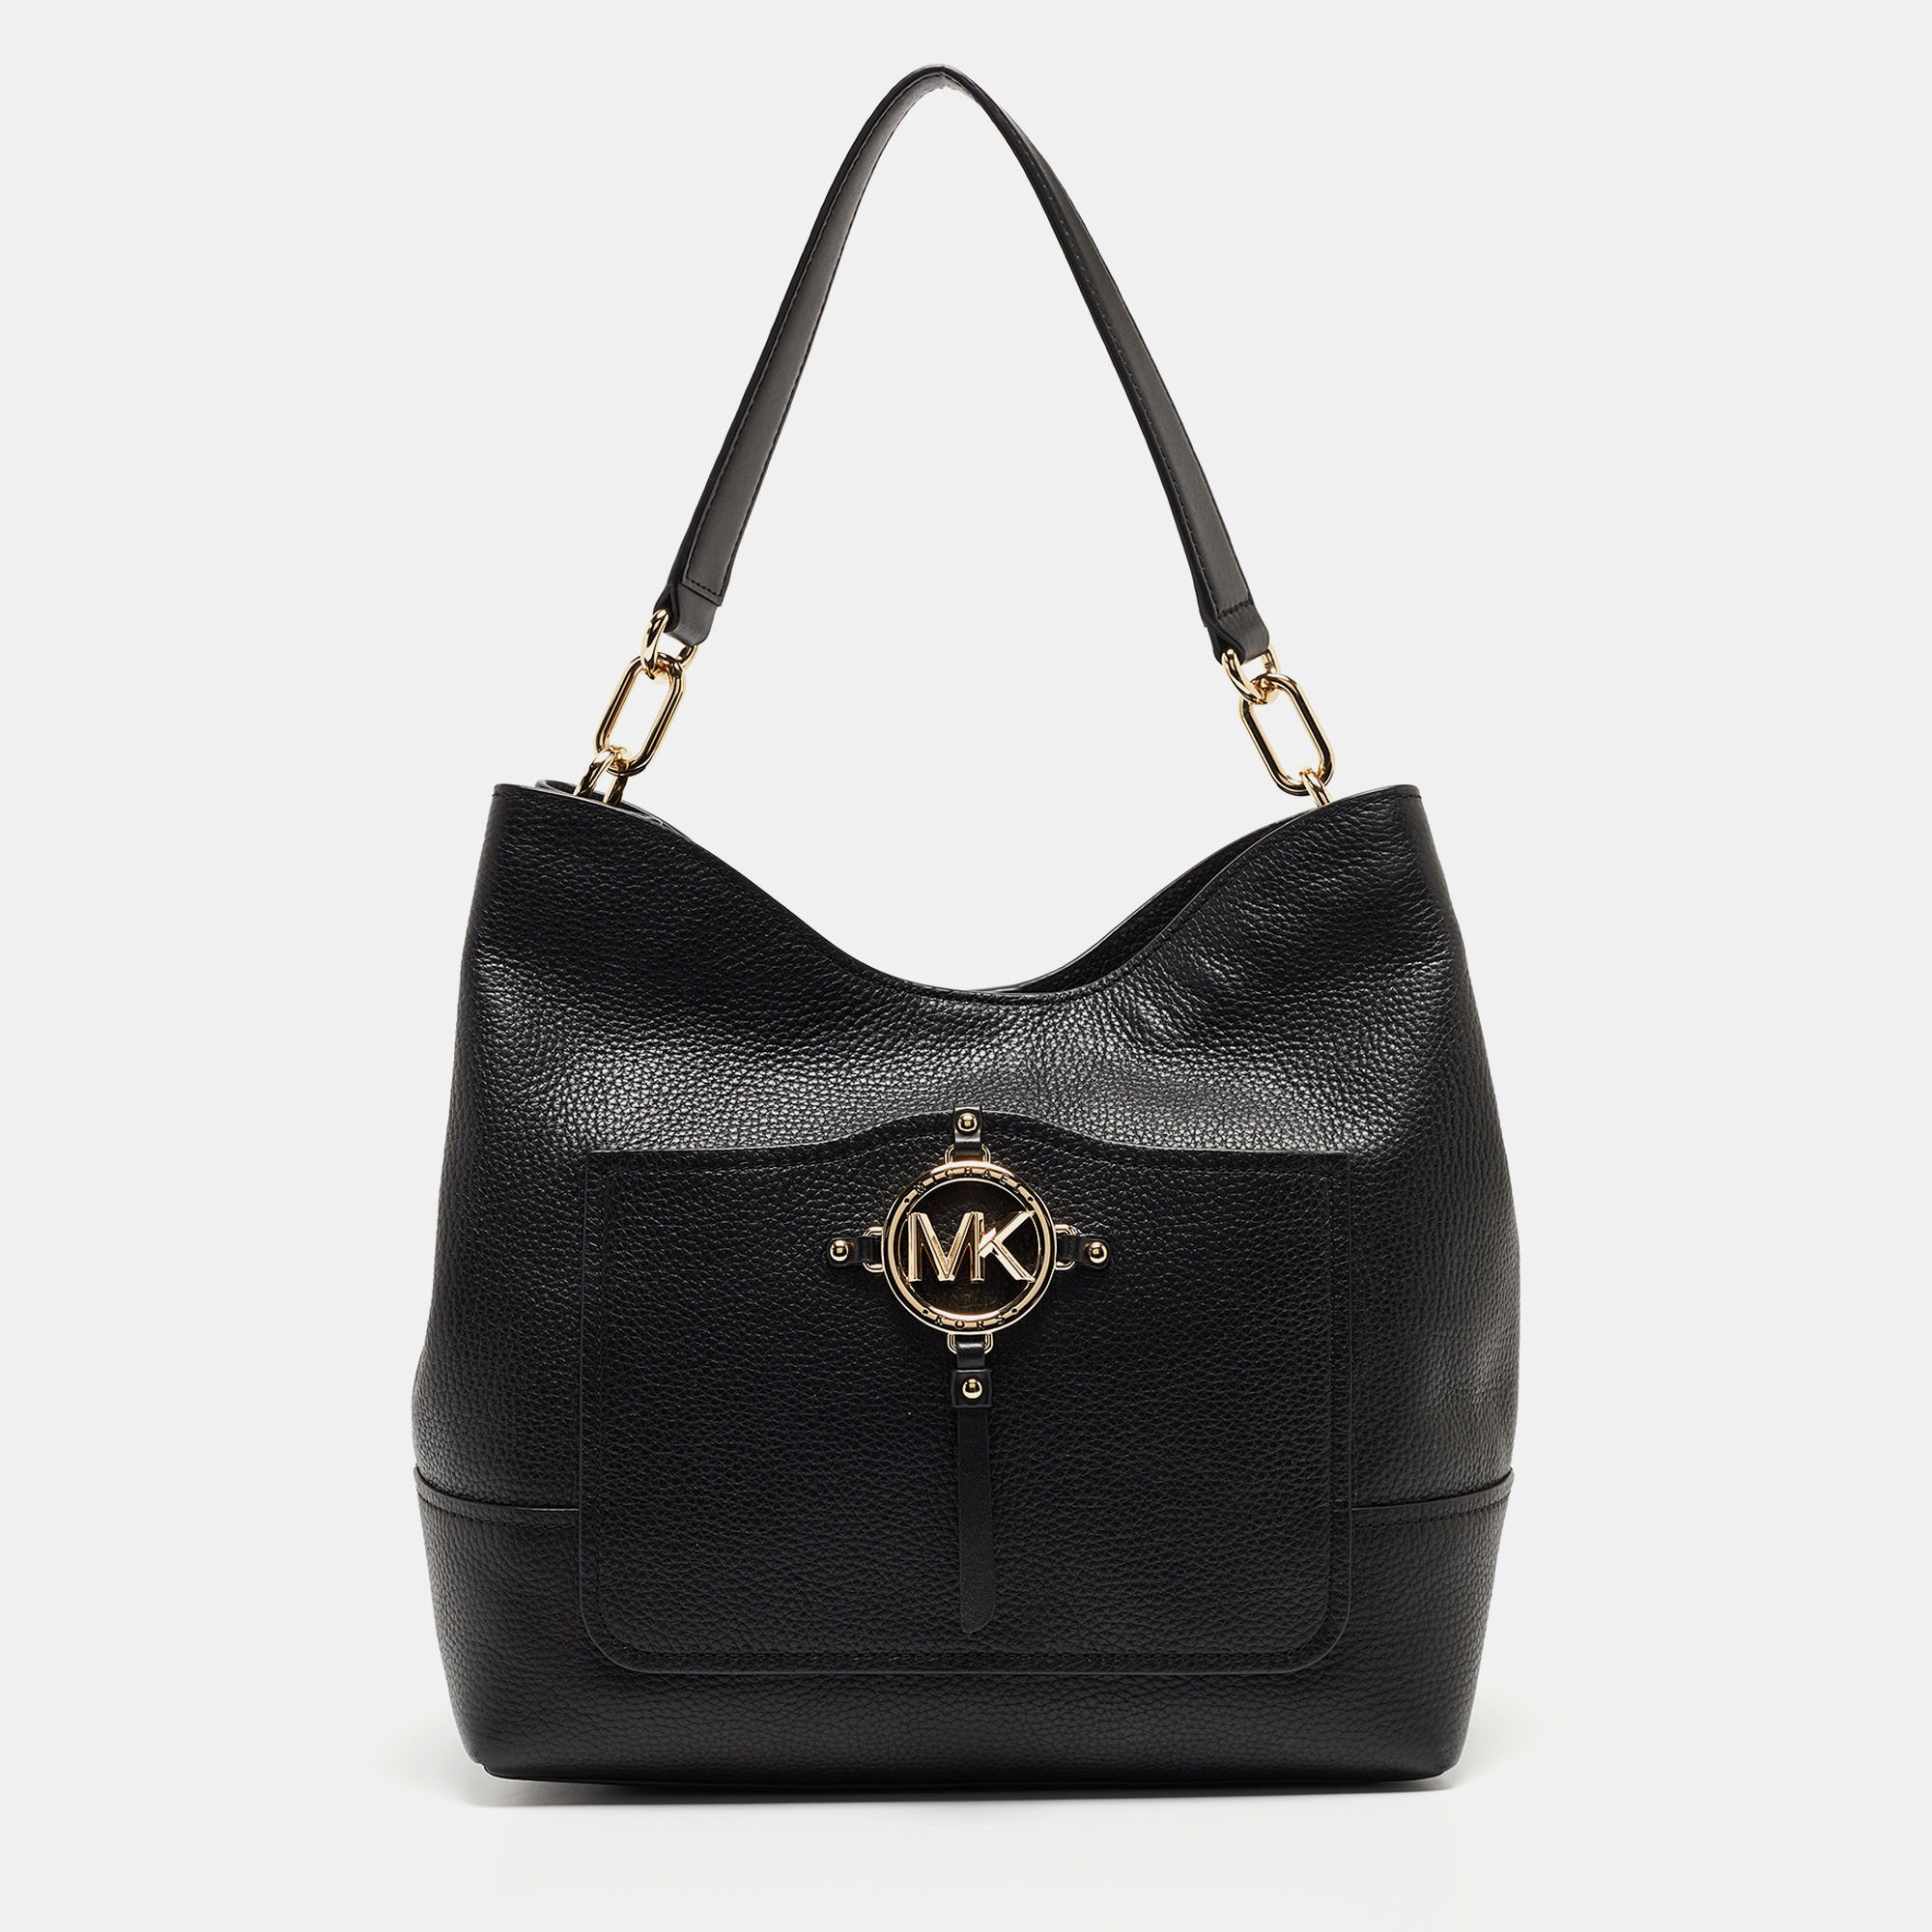 Pre-owned Michael Kors Black Leather Amy Hobo